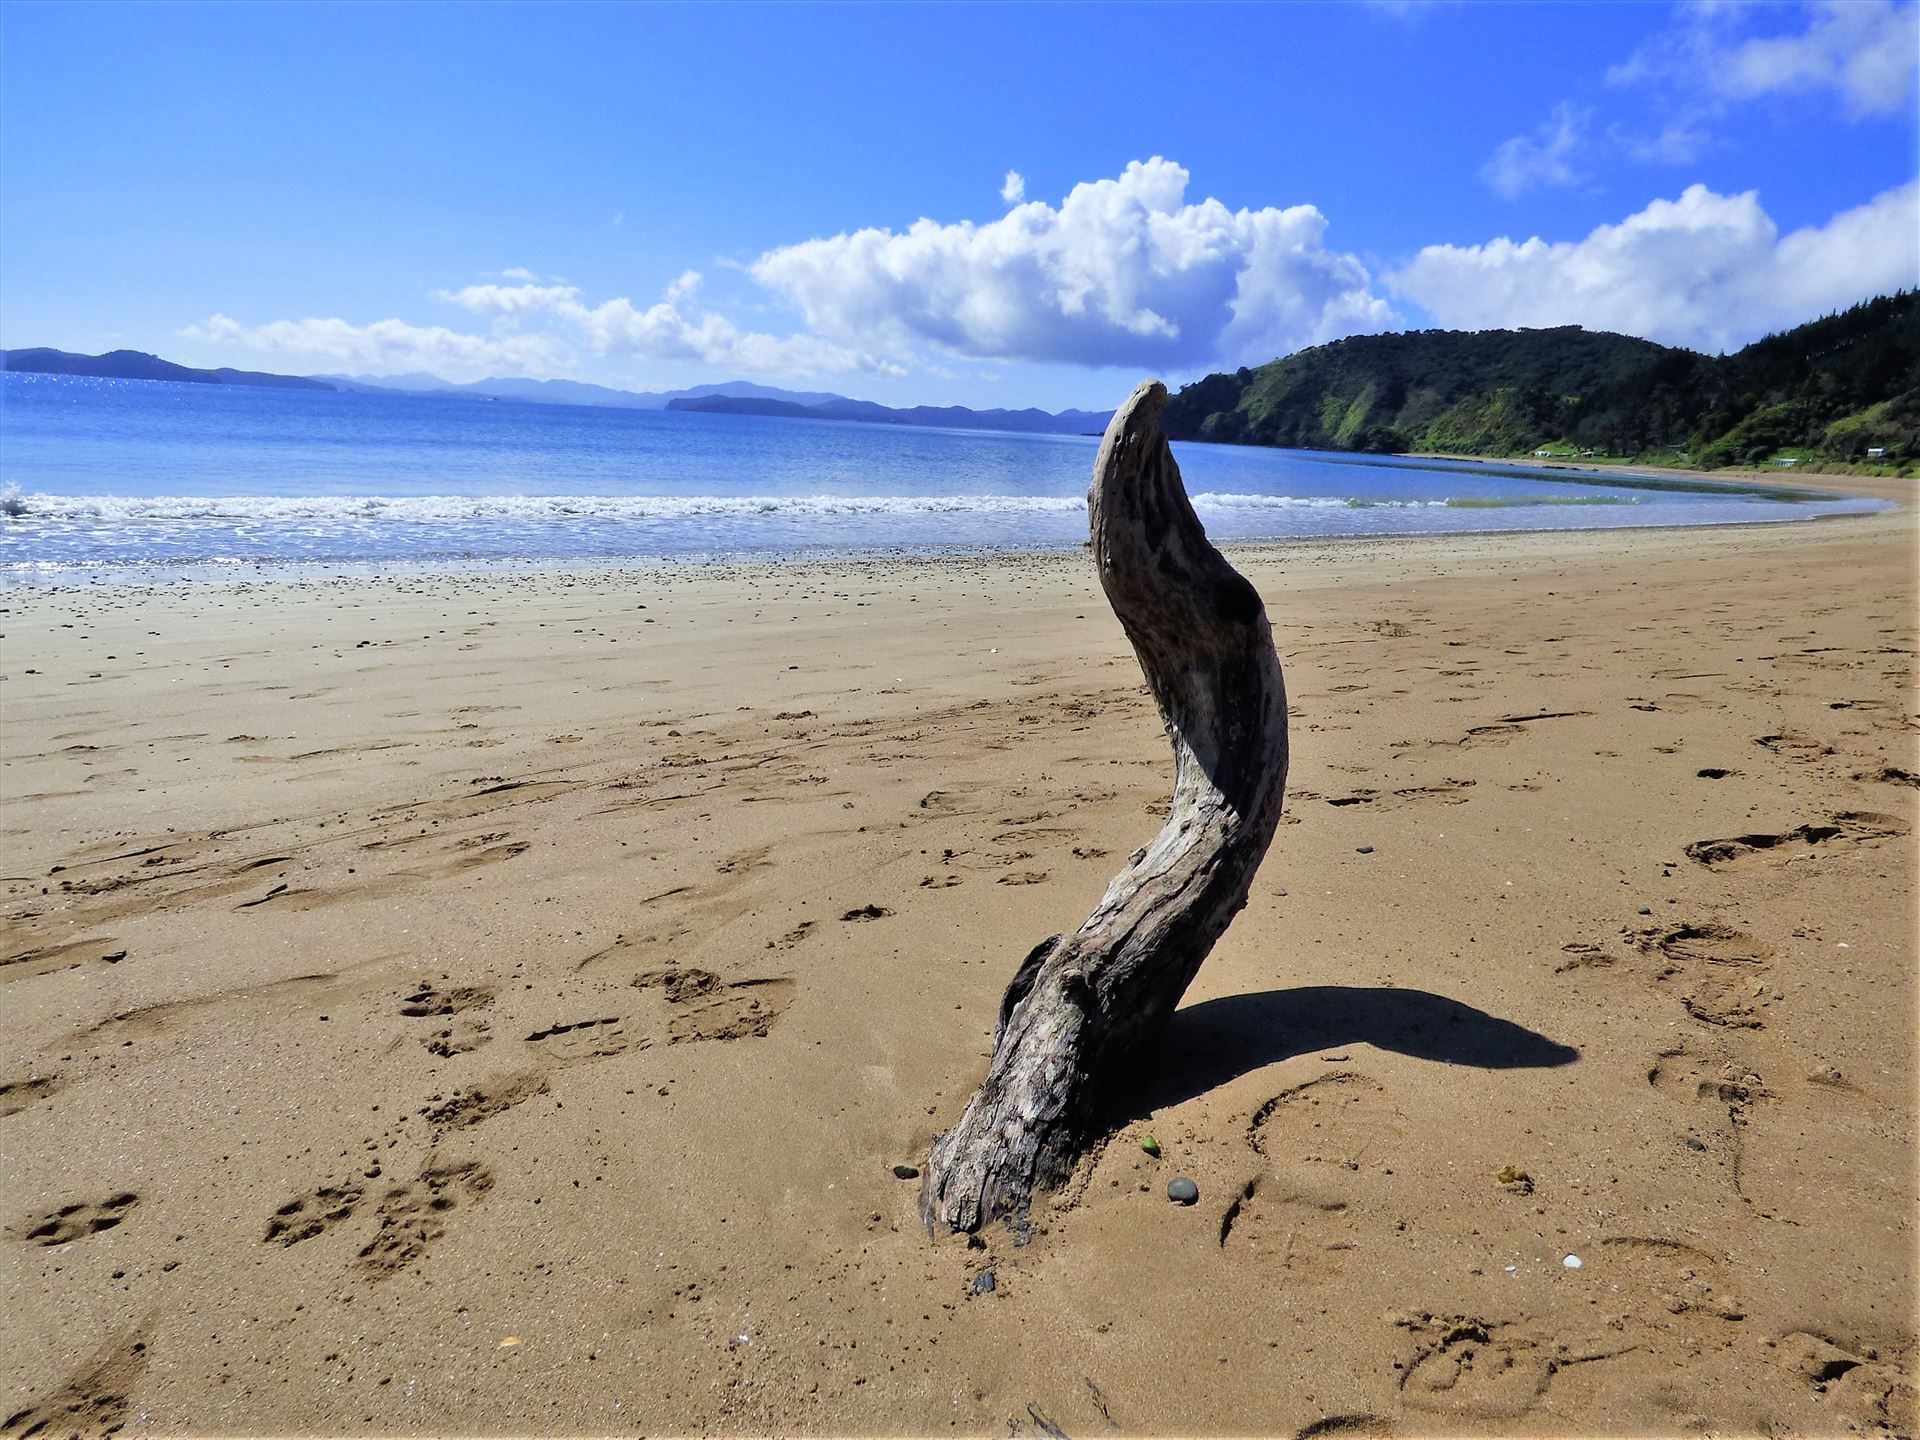 Beach and driftwood sculpture  by Lewis & Co. Photography